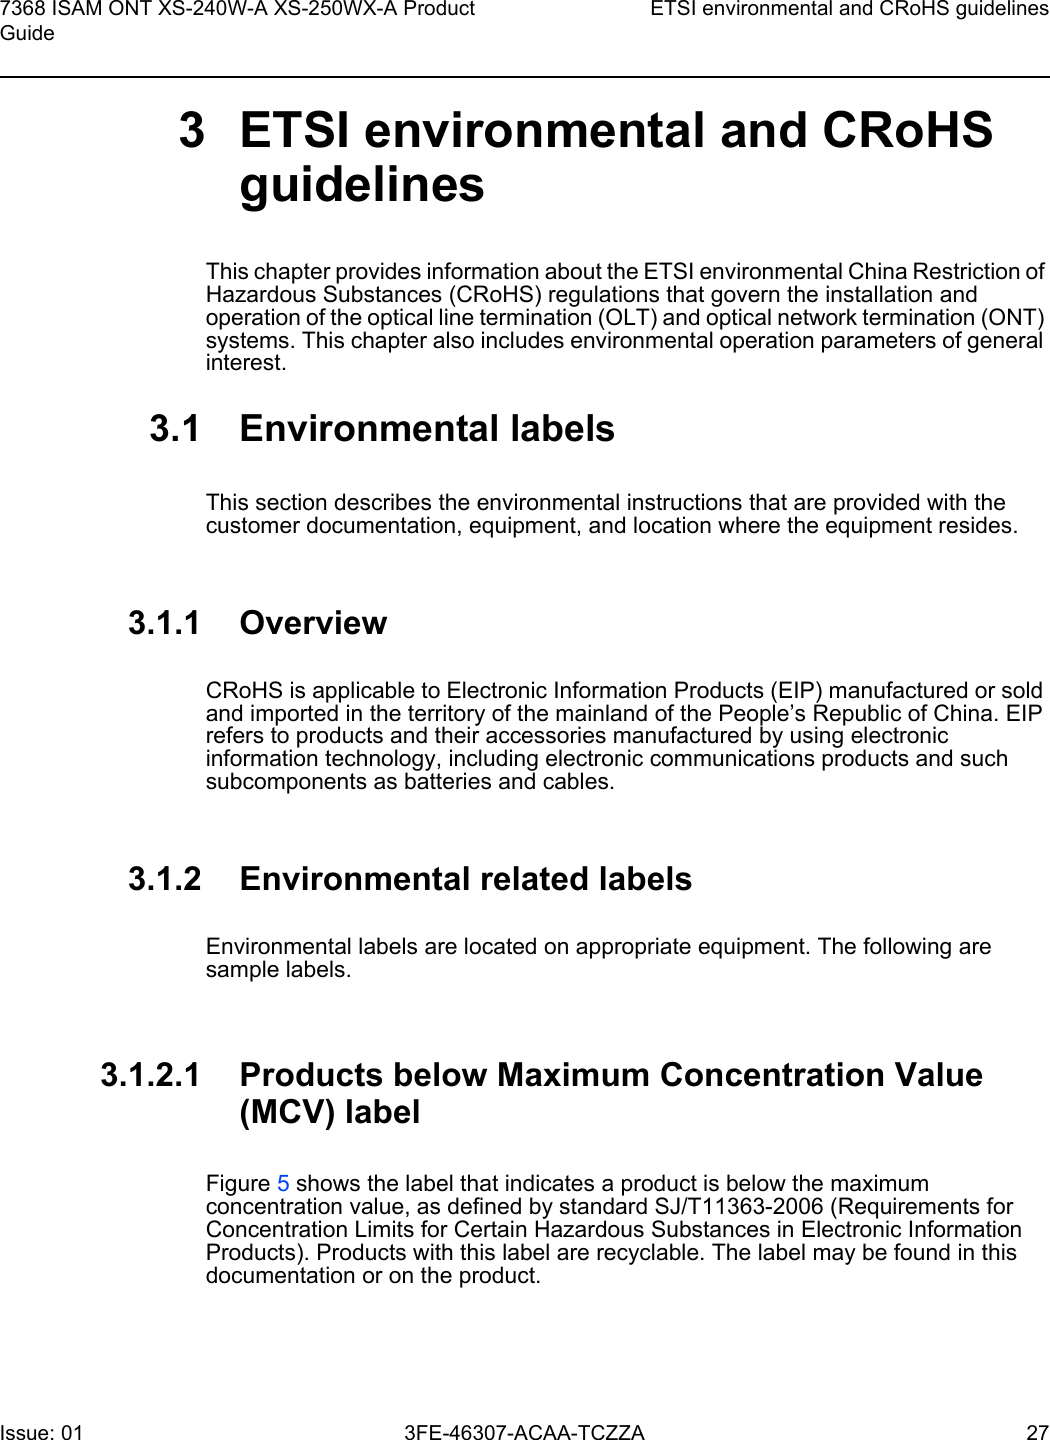 7368 ISAM ONT XS-240W-A XS-250WX-A Product GuideETSI environmental and CRoHS guidelinesIssue: 01 3FE-46307-ACAA-TCZZA 27 3 ETSI environmental and CRoHS guidelinesThis chapter provides information about the ETSI environmental China Restriction of Hazardous Substances (CRoHS) regulations that govern the installation and operation of the optical line termination (OLT) and optical network termination (ONT) systems. This chapter also includes environmental operation parameters of general interest.3.1 Environmental labelsThis section describes the environmental instructions that are provided with the customer documentation, equipment, and location where the equipment resides.3.1.1 OverviewCRoHS is applicable to Electronic Information Products (EIP) manufactured or sold and imported in the territory of the mainland of the People’s Republic of China. EIP refers to products and their accessories manufactured by using electronic information technology, including electronic communications products and such subcomponents as batteries and cables.3.1.2 Environmental related labelsEnvironmental labels are located on appropriate equipment. The following are sample labels.3.1.2.1 Products below Maximum Concentration Value (MCV) labelFigure 5 shows the label that indicates a product is below the maximum concentration value, as defined by standard SJ/T11363-2006 (Requirements for Concentration Limits for Certain Hazardous Substances in Electronic Information Products). Products with this label are recyclable. The label may be found in this documentation or on the product.